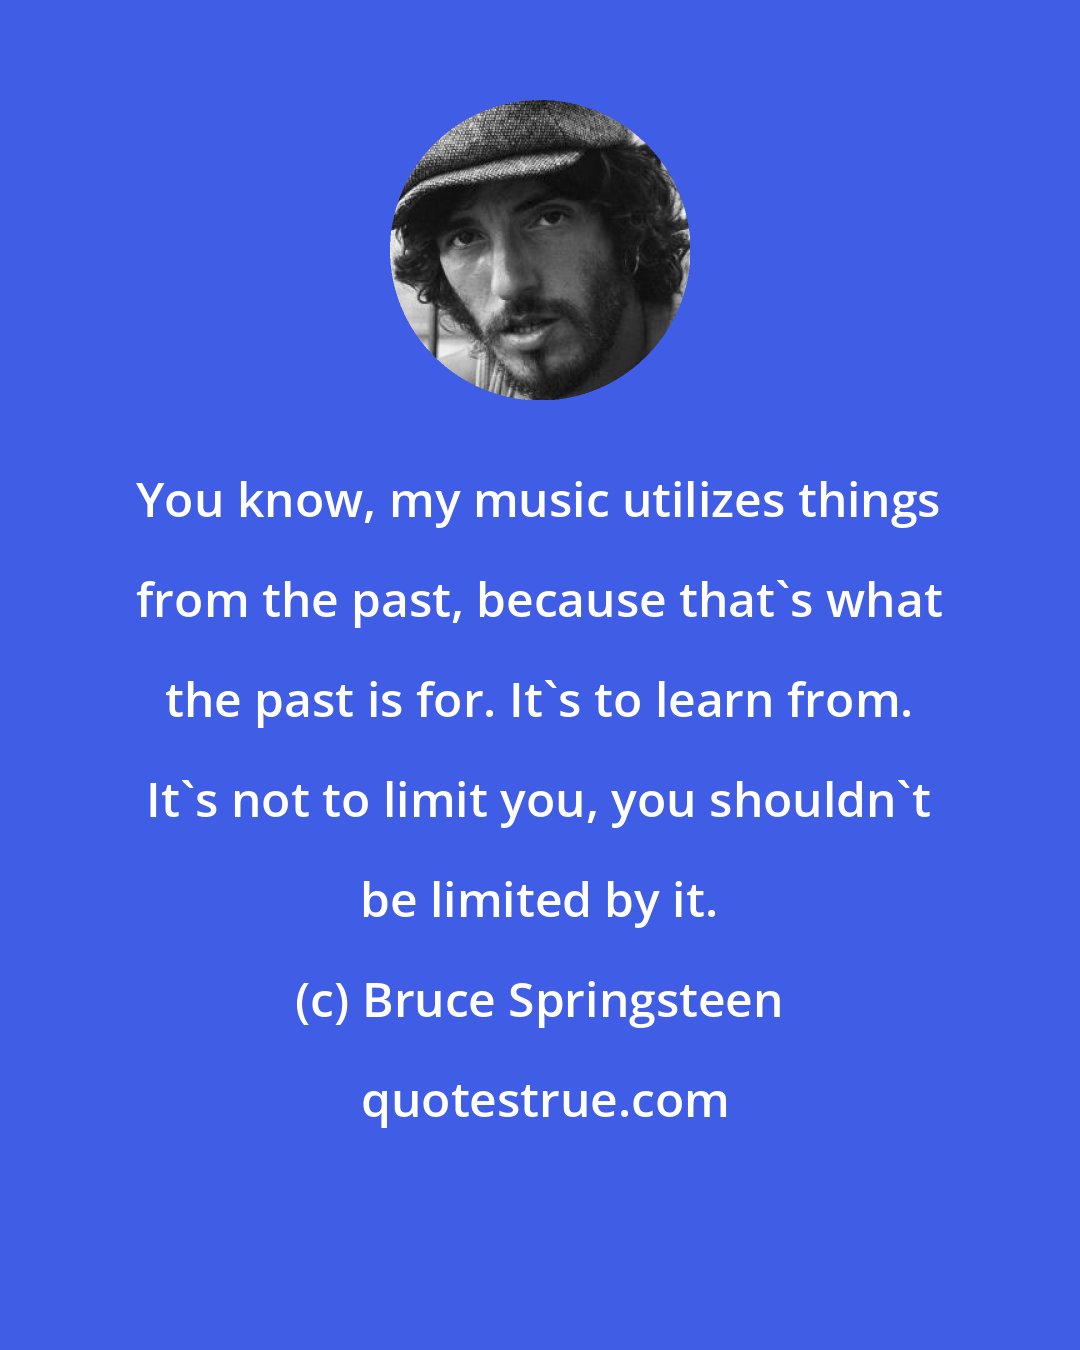 Bruce Springsteen: You know, my music utilizes things from the past, because that's what the past is for. It's to learn from. It's not to limit you, you shouldn't be limited by it.